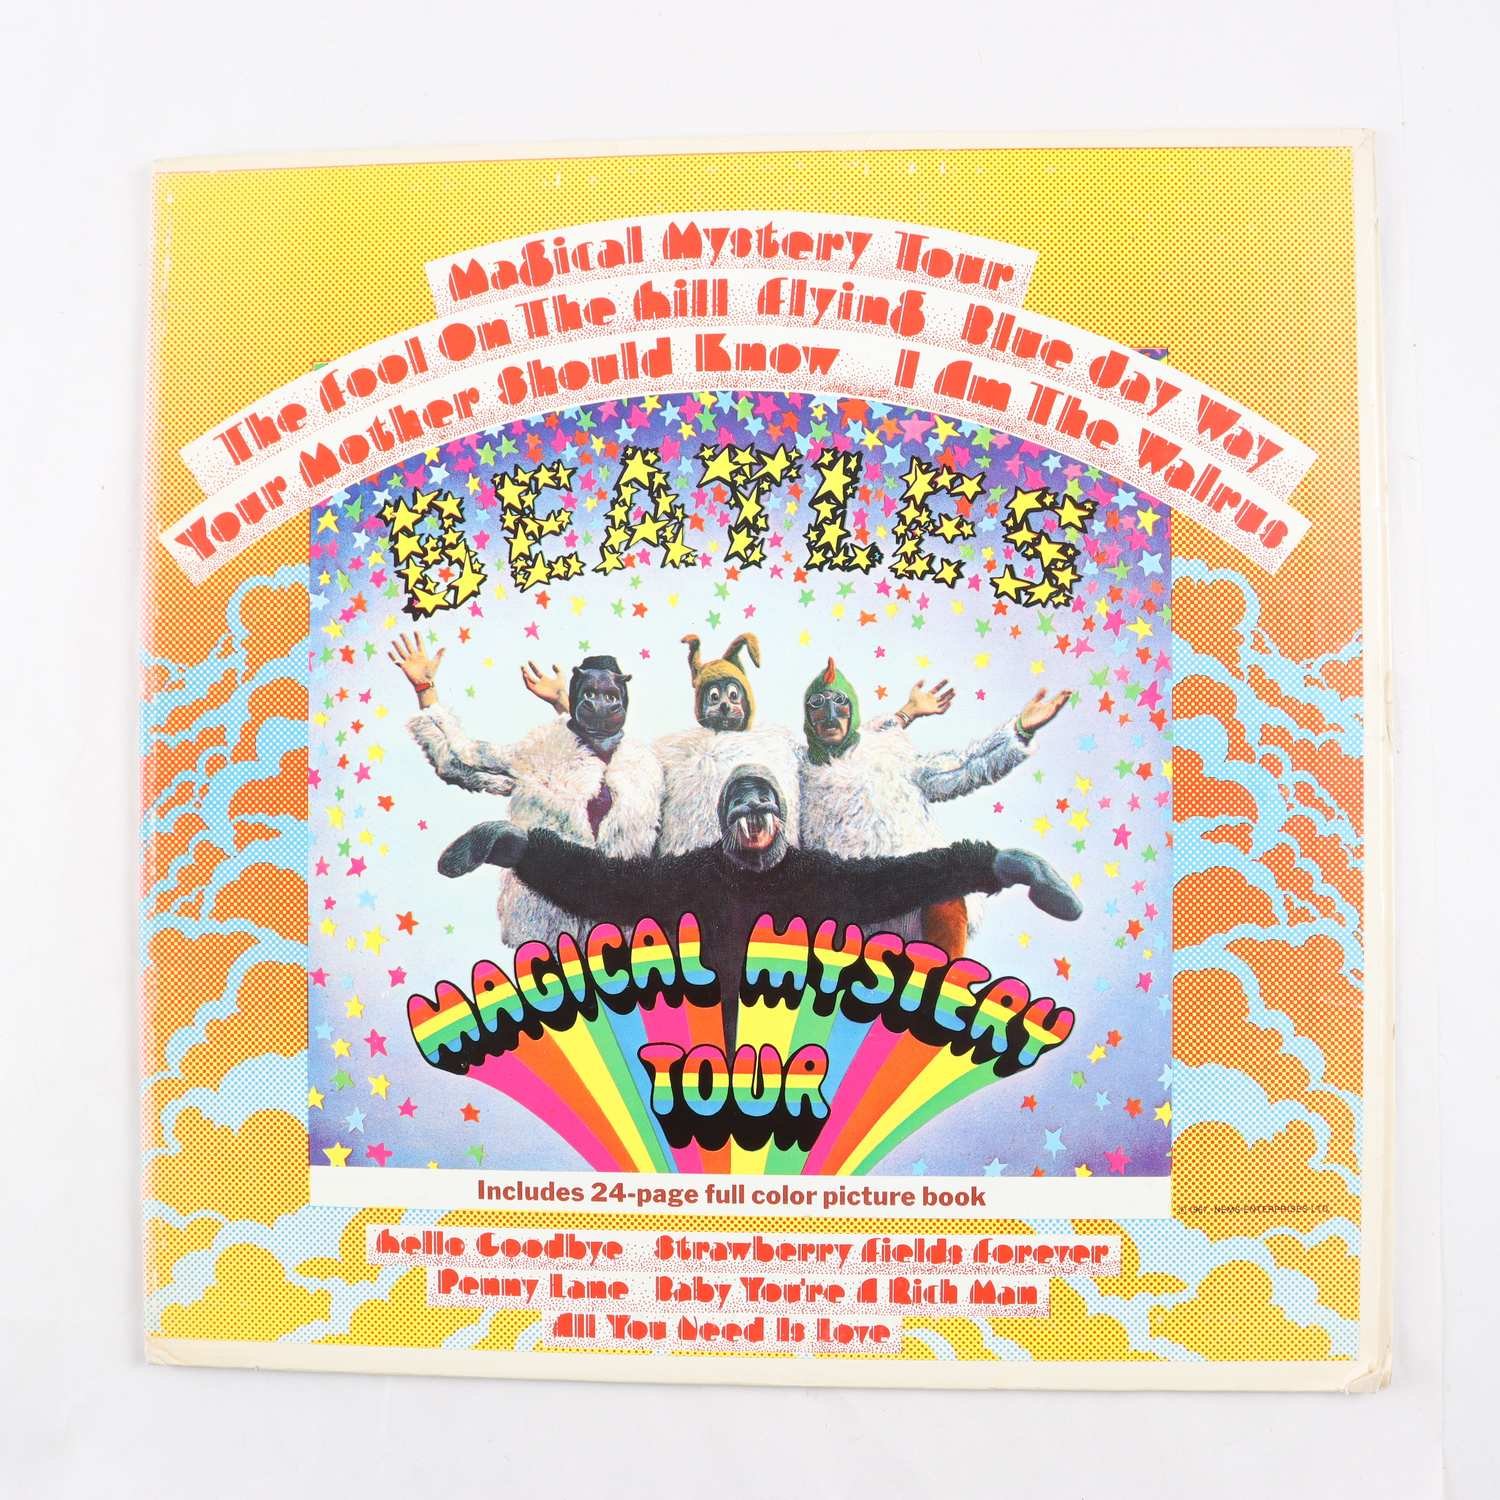 LP The Beatles, Magical Mystery Tour